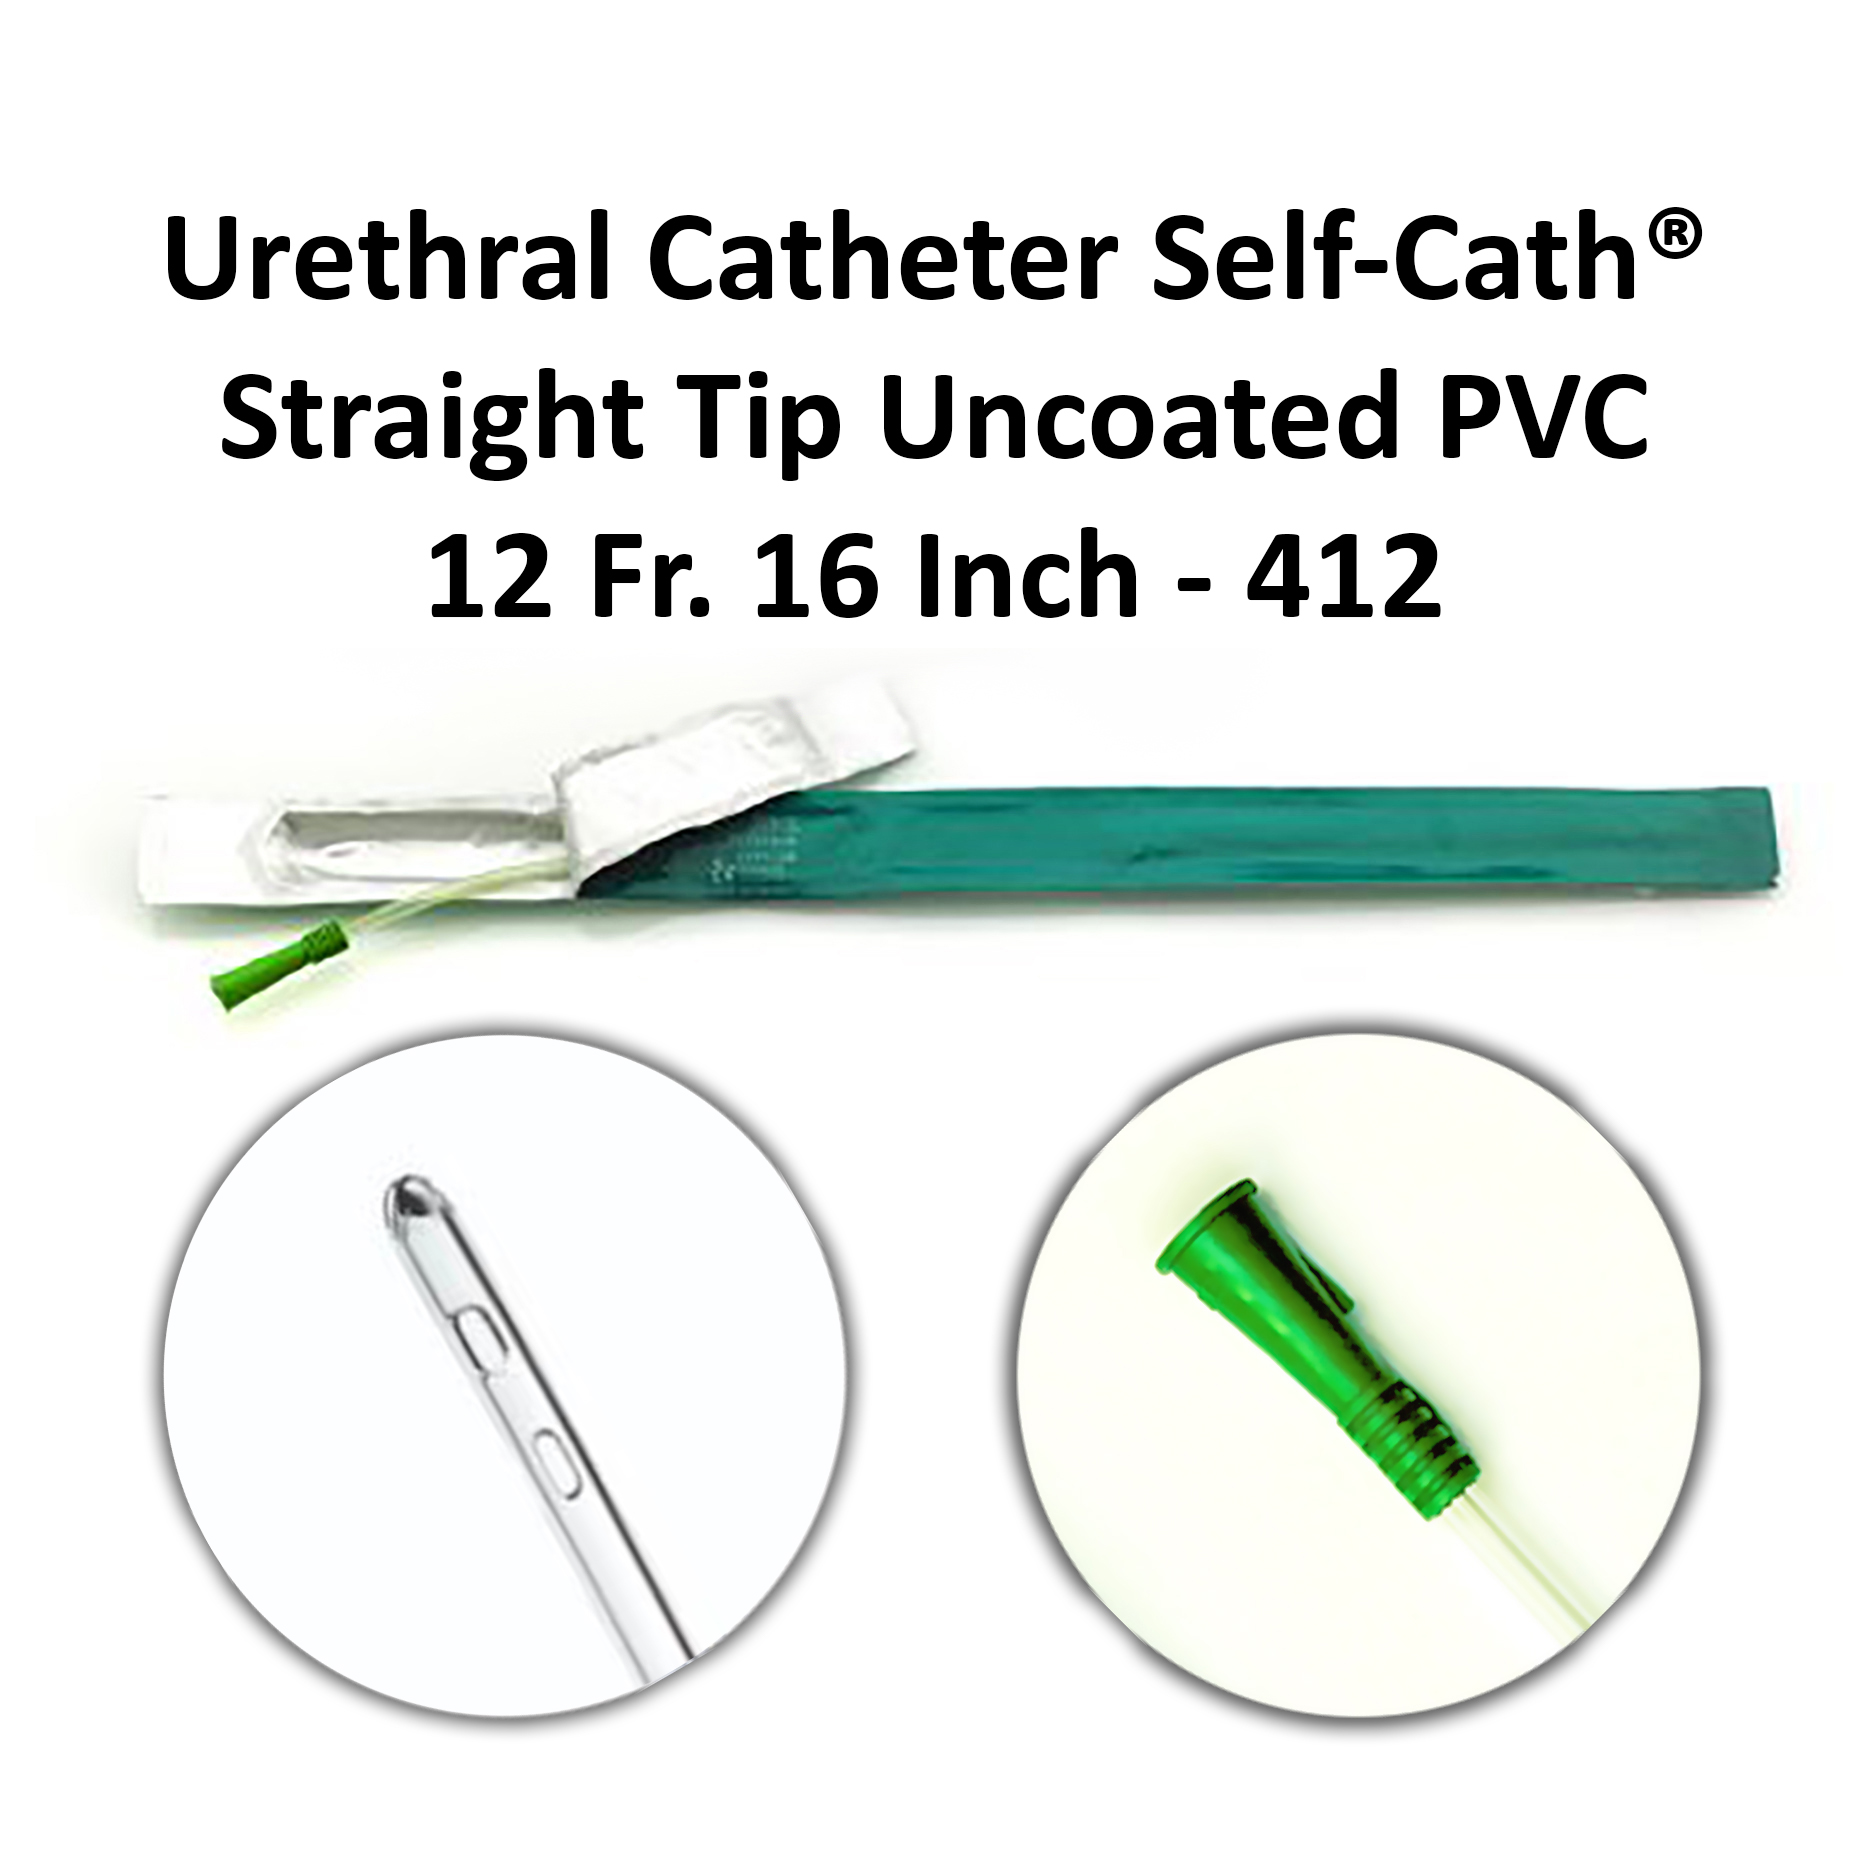 Urethral Catheter Self-Cath® Straight Tip Uncoated PVC 12 Fr. 16 Inch - 412